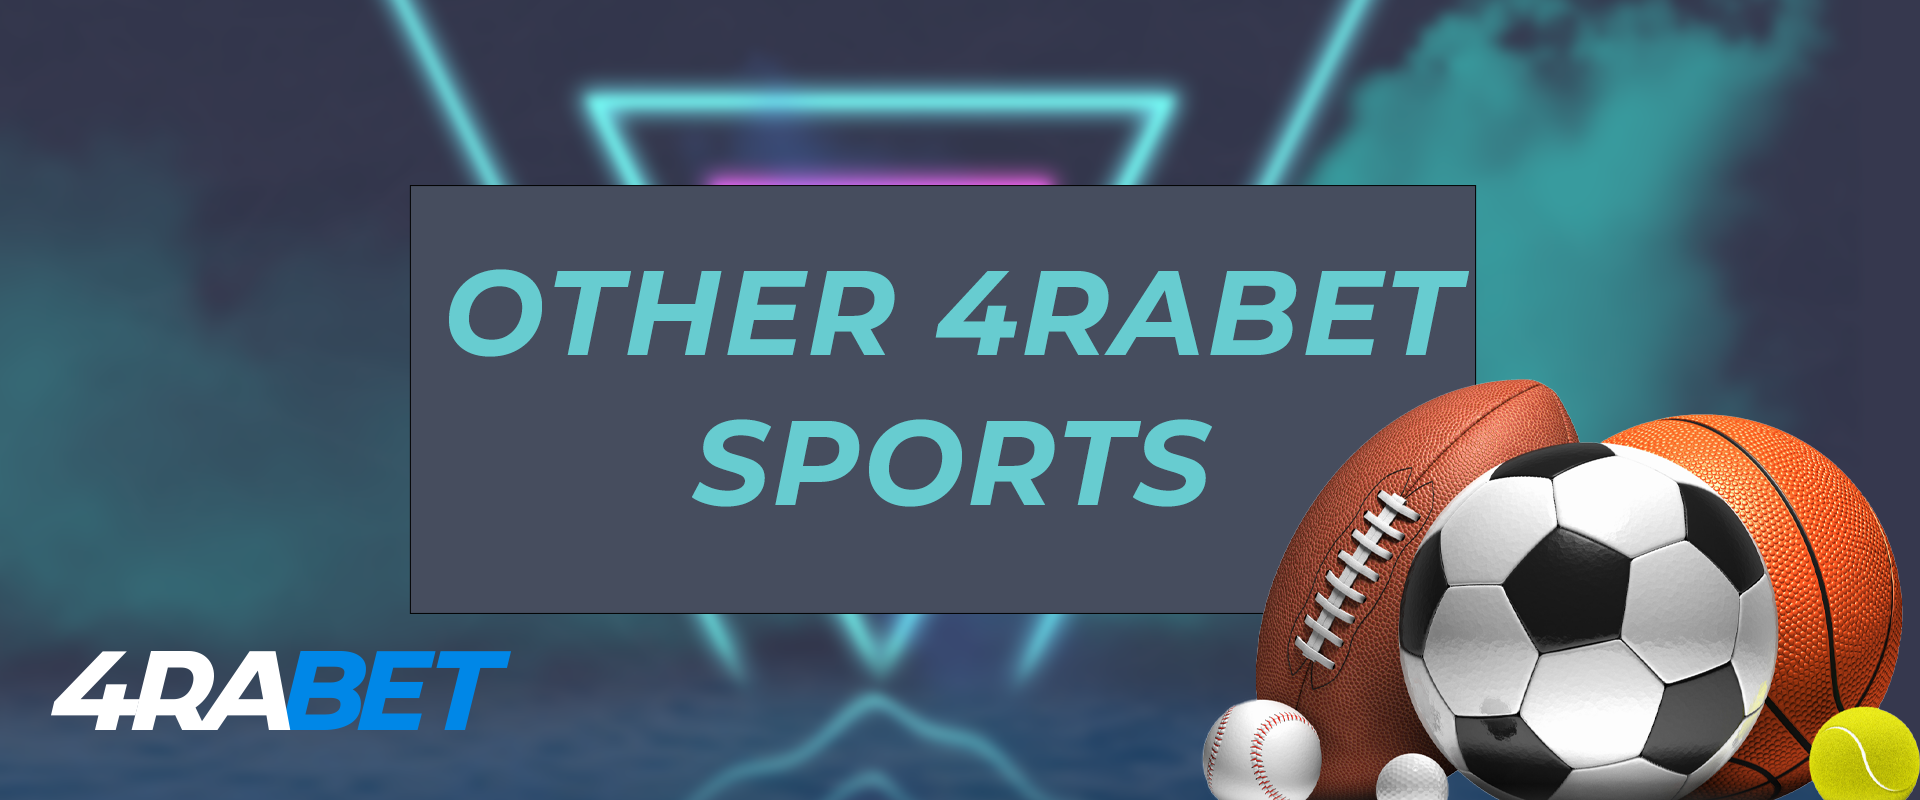 Other existing sports events on the 4rabet betting platform.